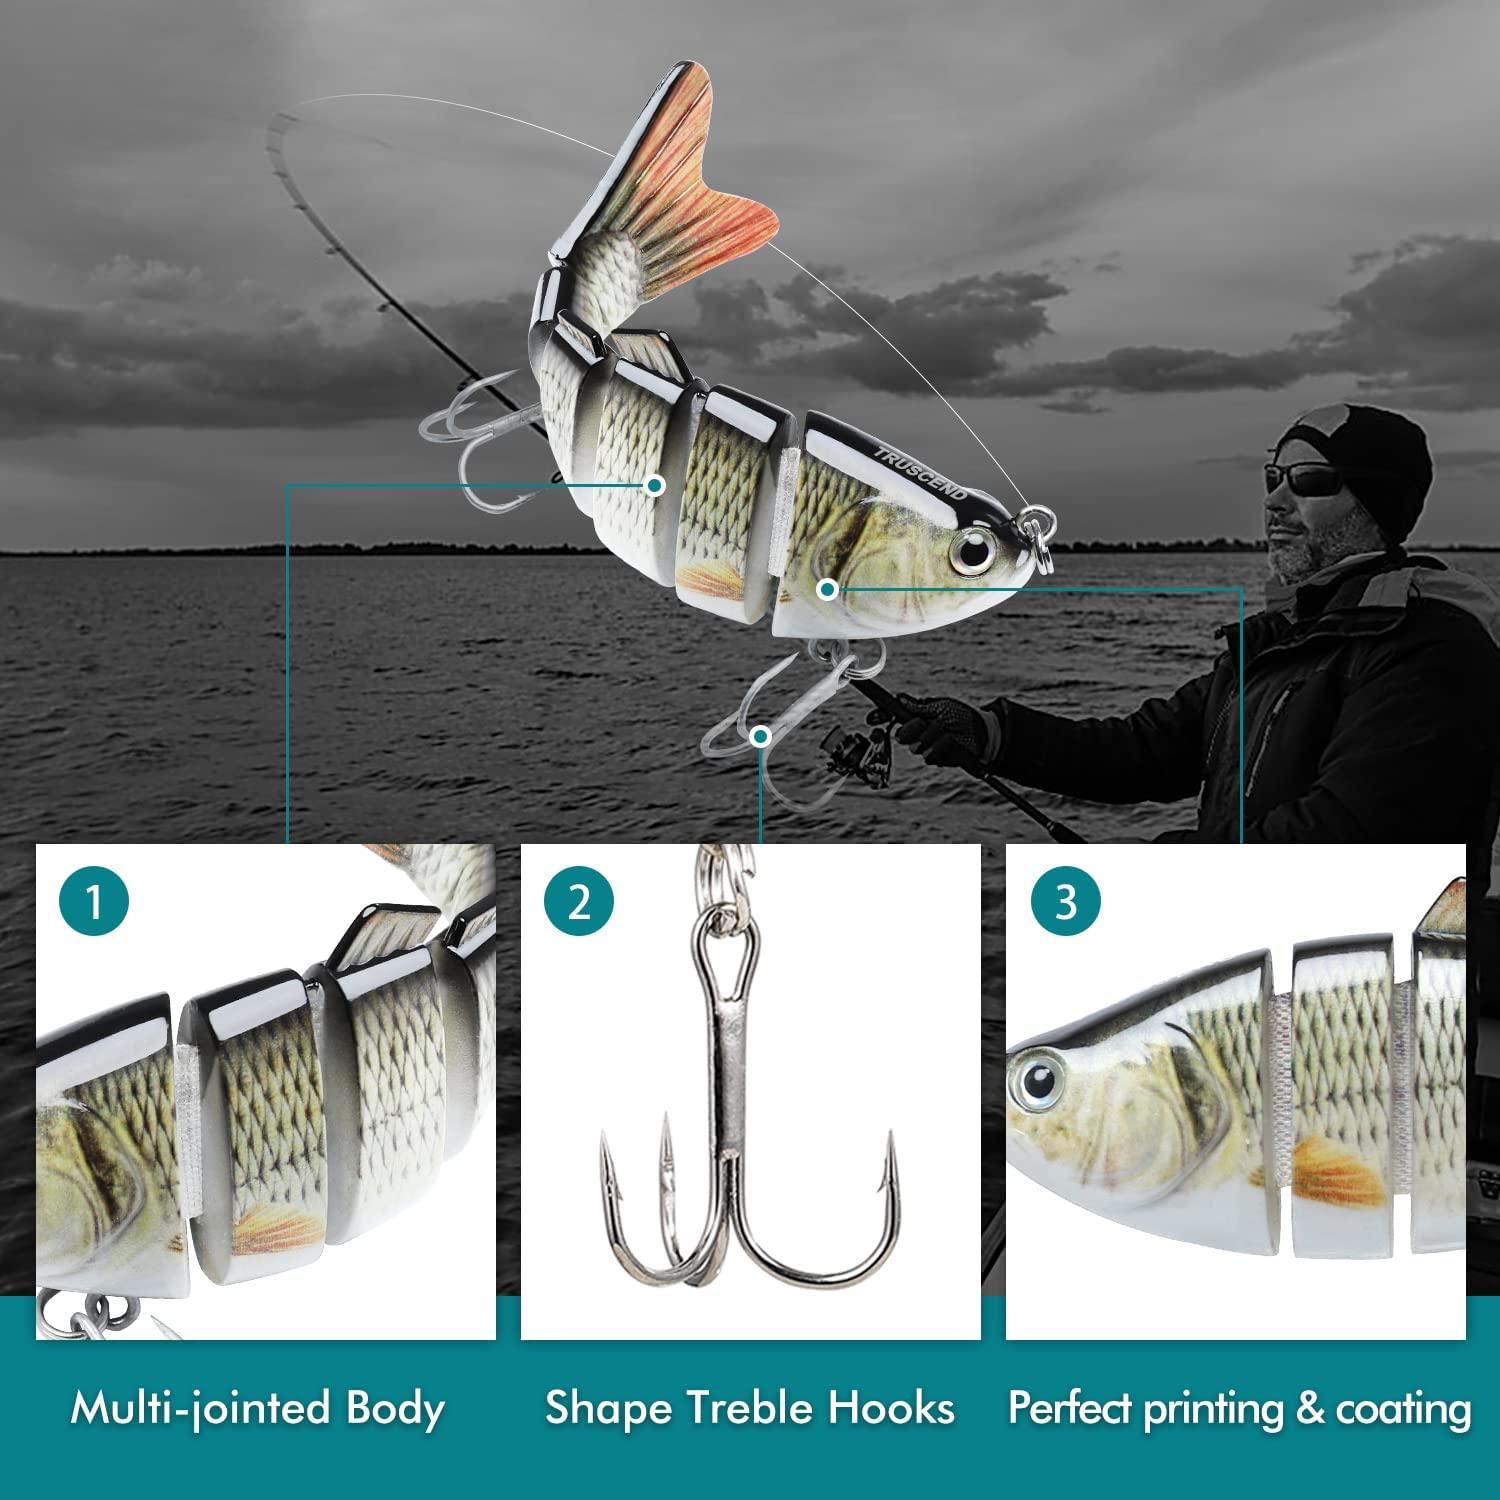 TRUSCEND Pencil Fishing Lures with VMCBKK Hooks 2 in 1 Pencil